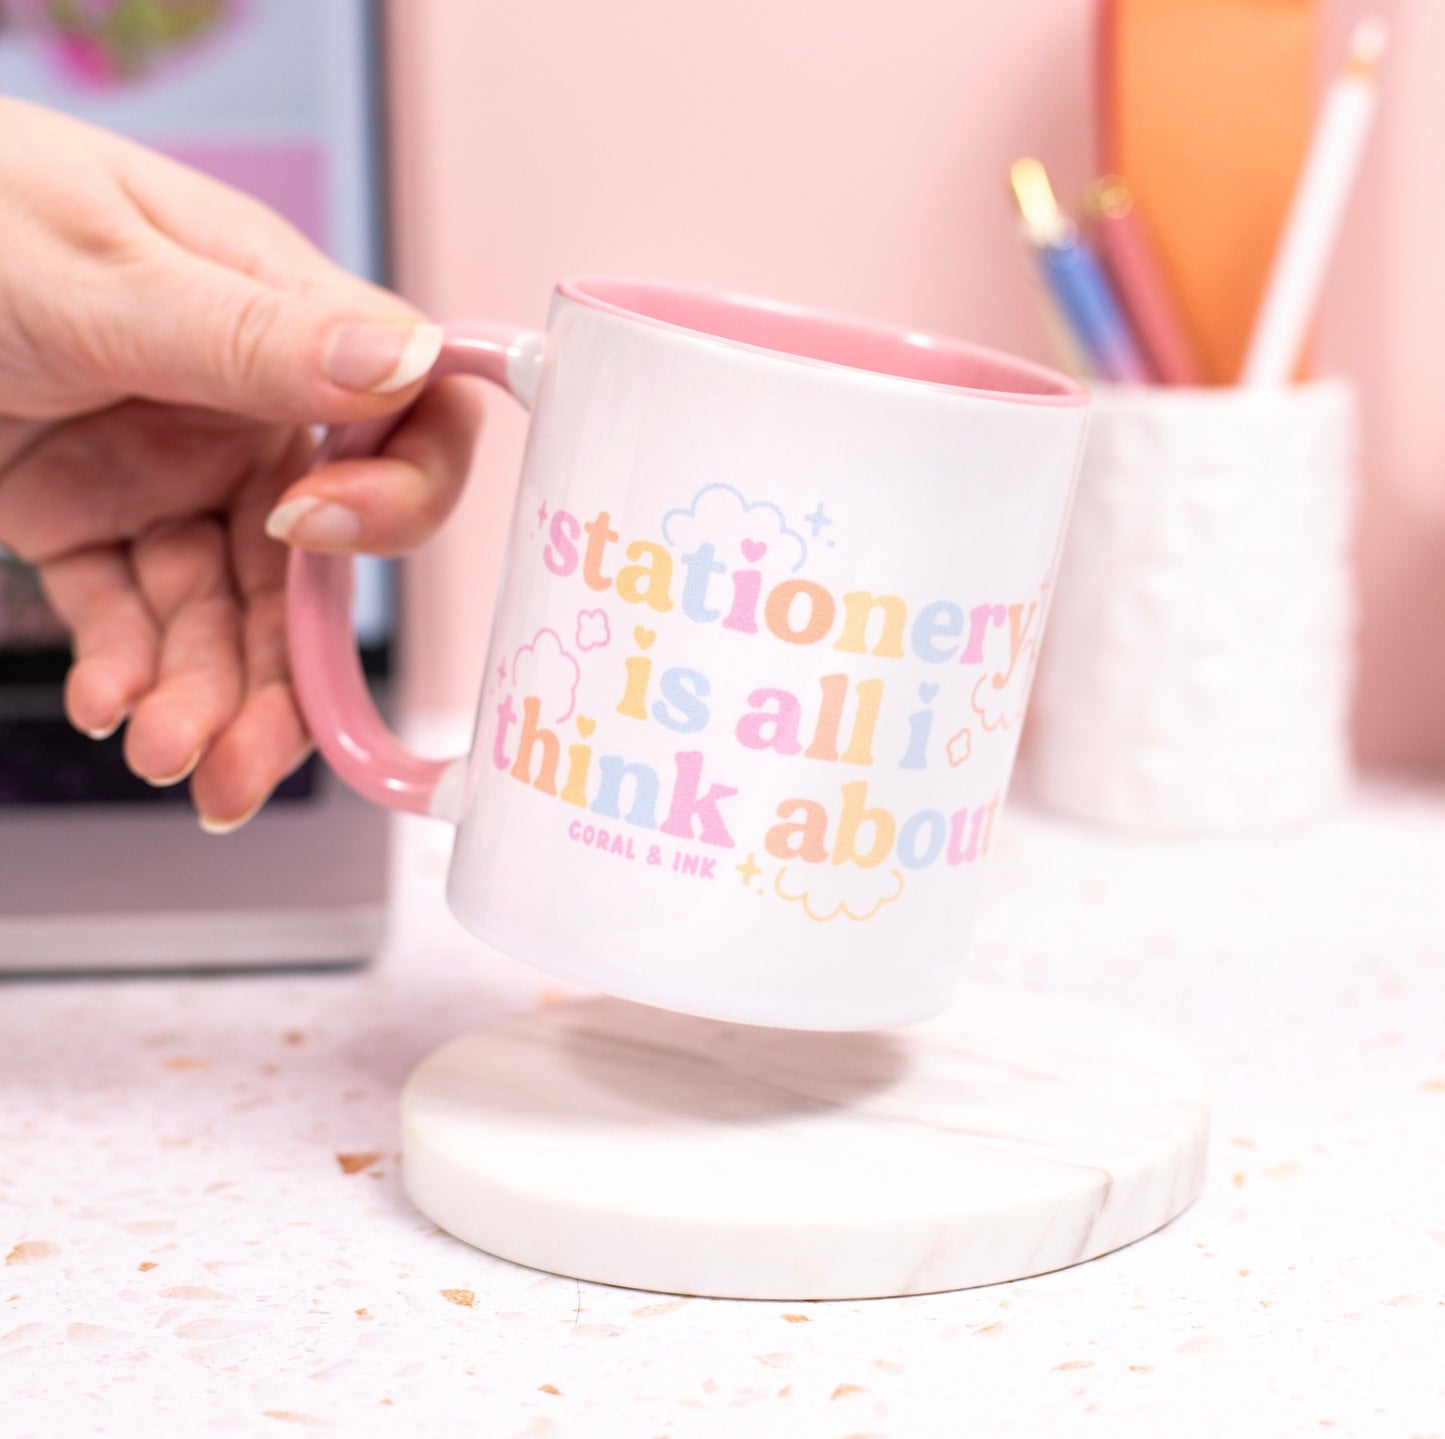 Stationery Is All I Think About Mug